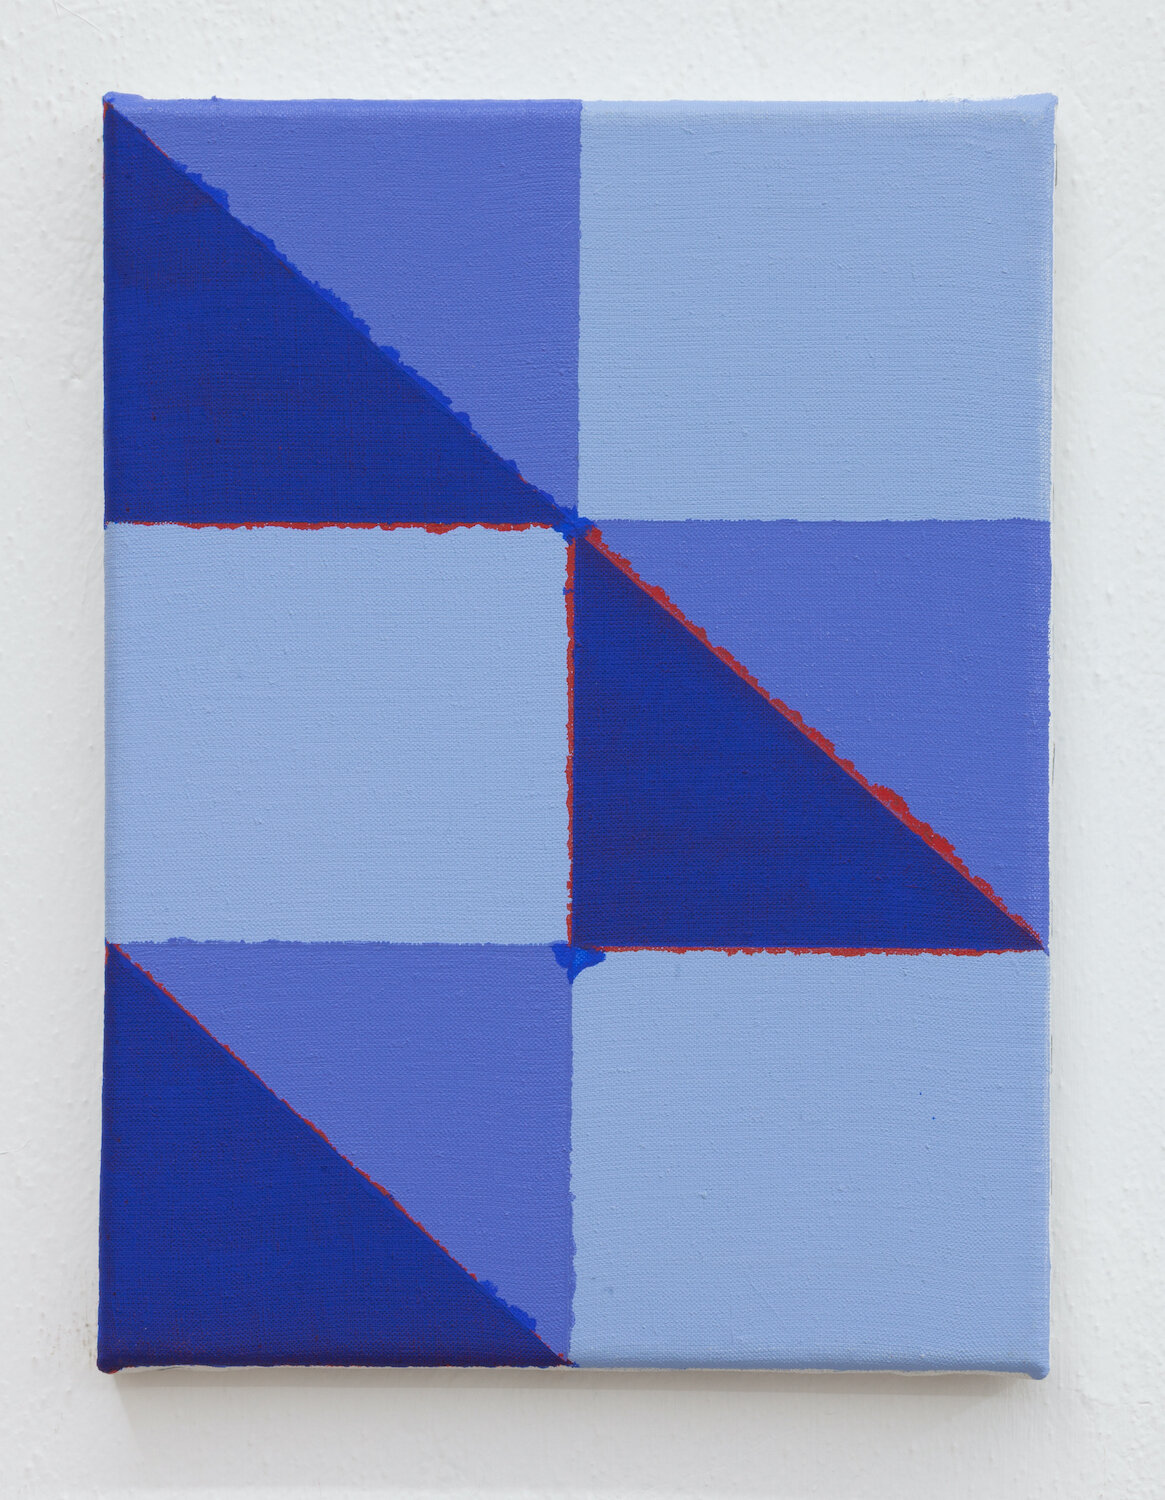  Joshua Abelow,  Untitled (Abstraction “HGG”) , 2019, Oil on linen, 12 x 9 inches 